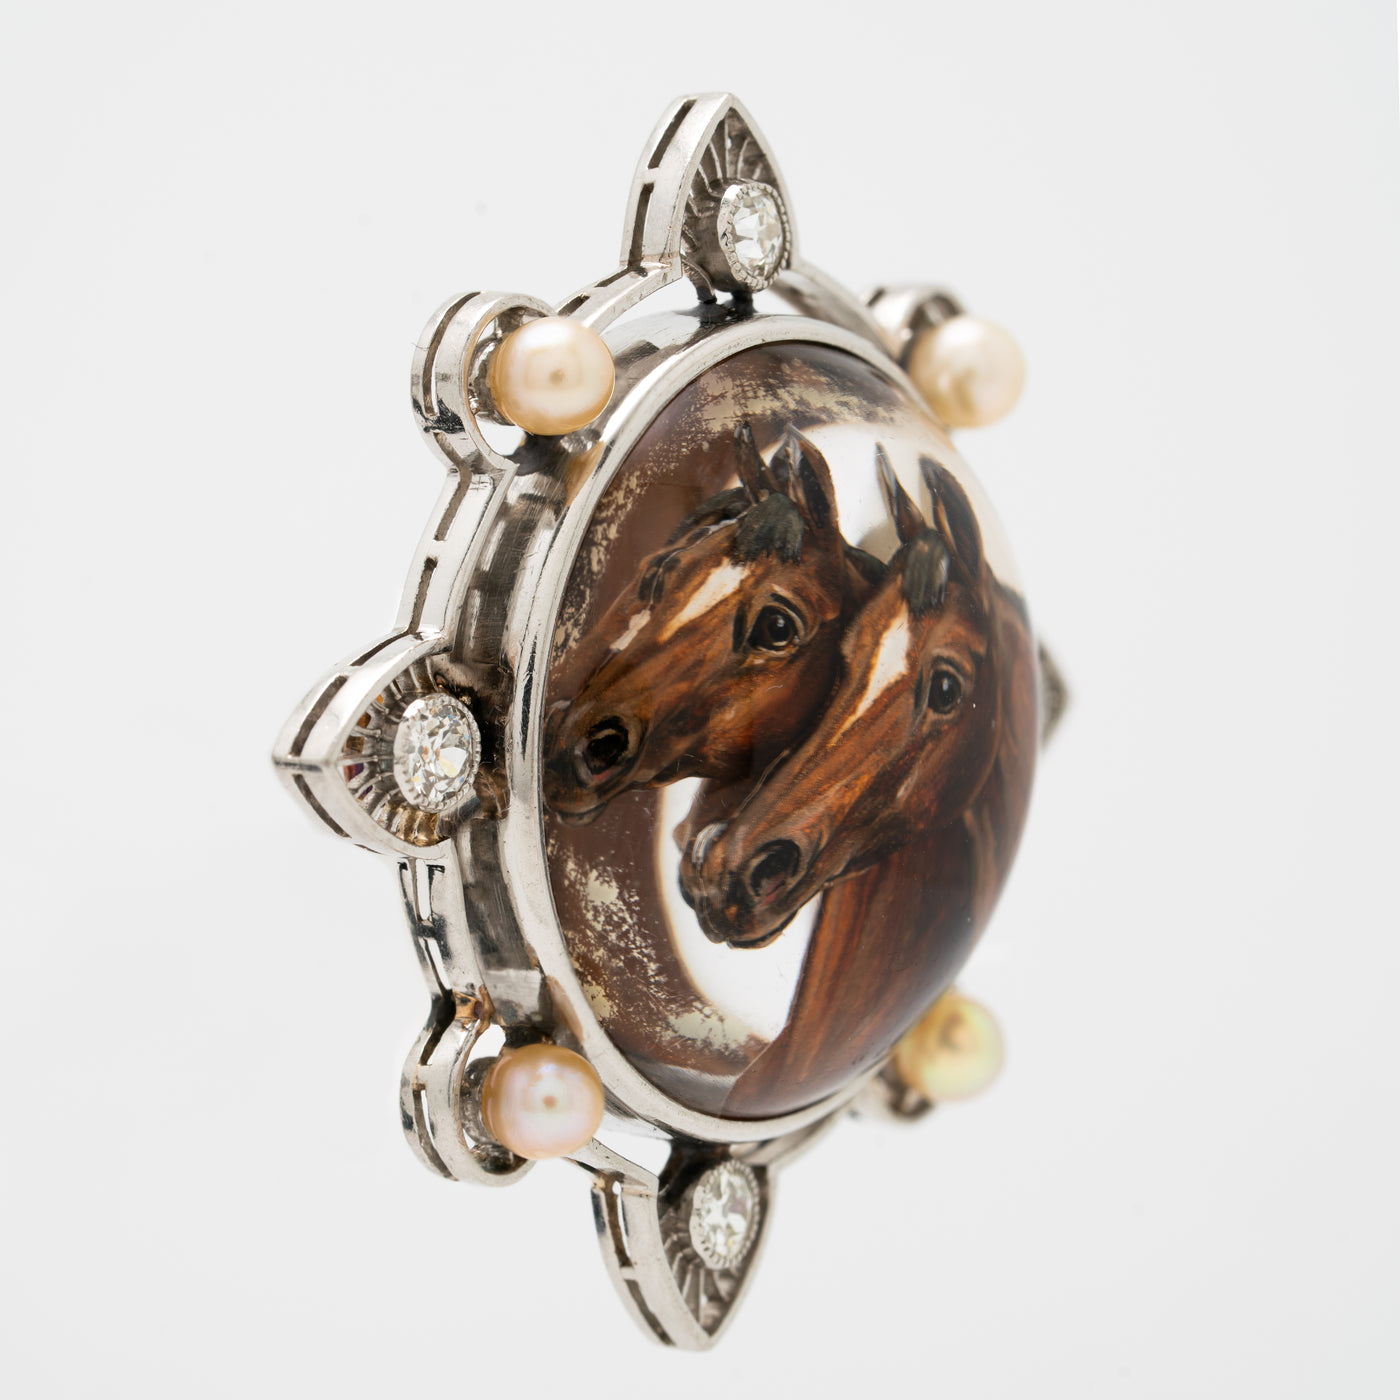 EDWARDIAN PLATINUM, DIAMOND AND PEARL REVERSED CARVED EQUESTRIAN BROOCH c.1910